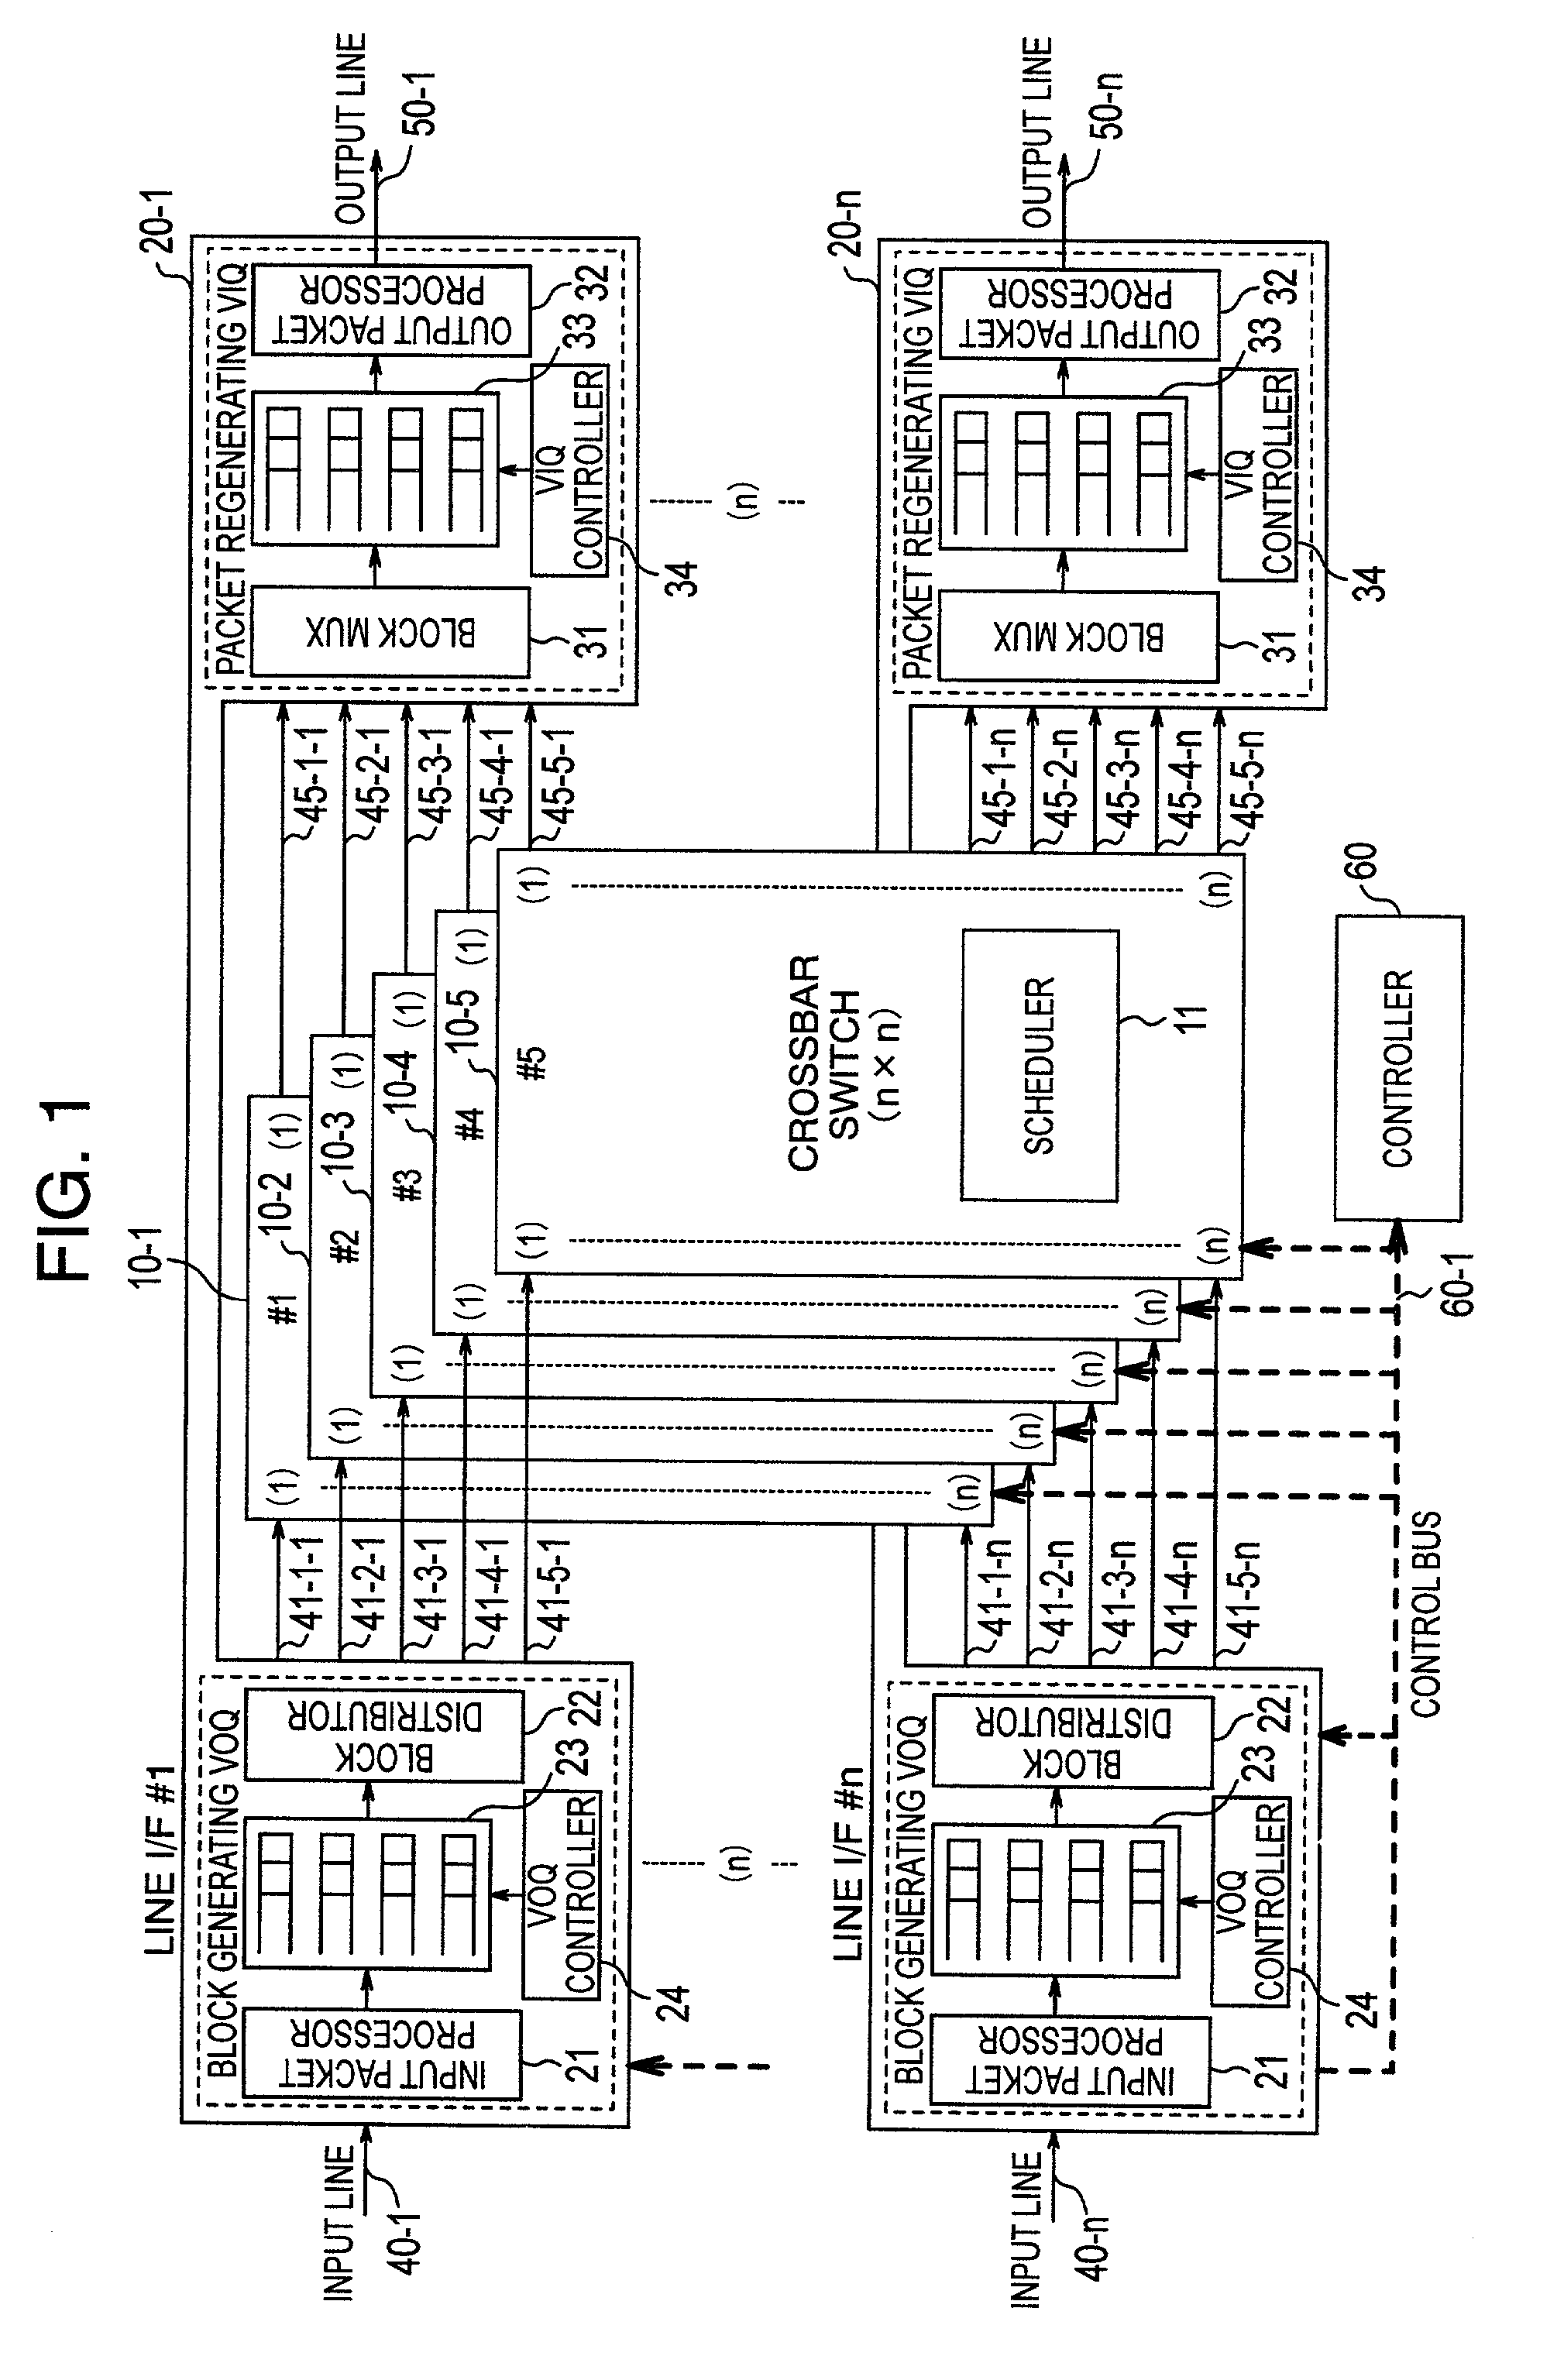 Packet switching apparatus